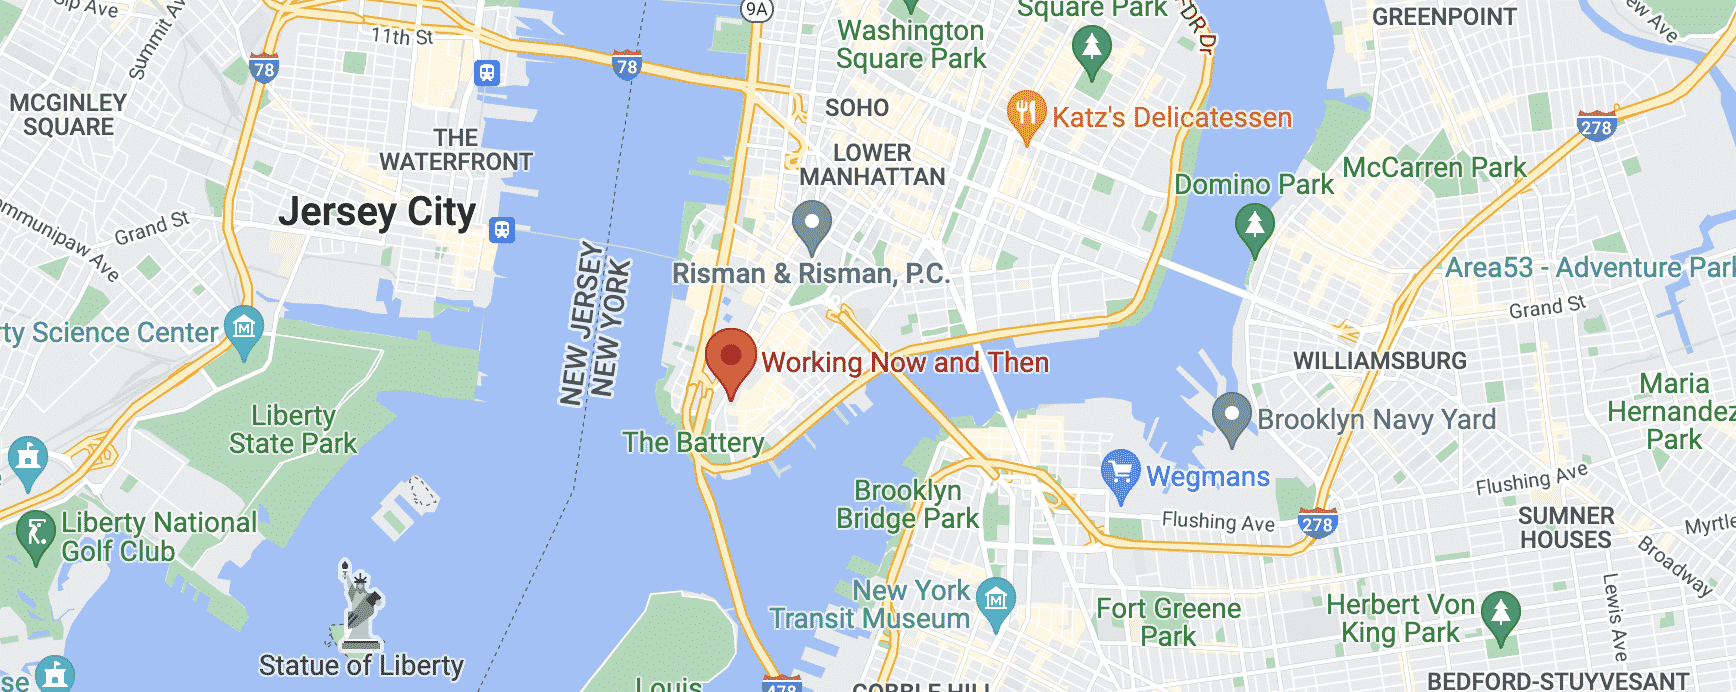 Google Map of Working Now and Then